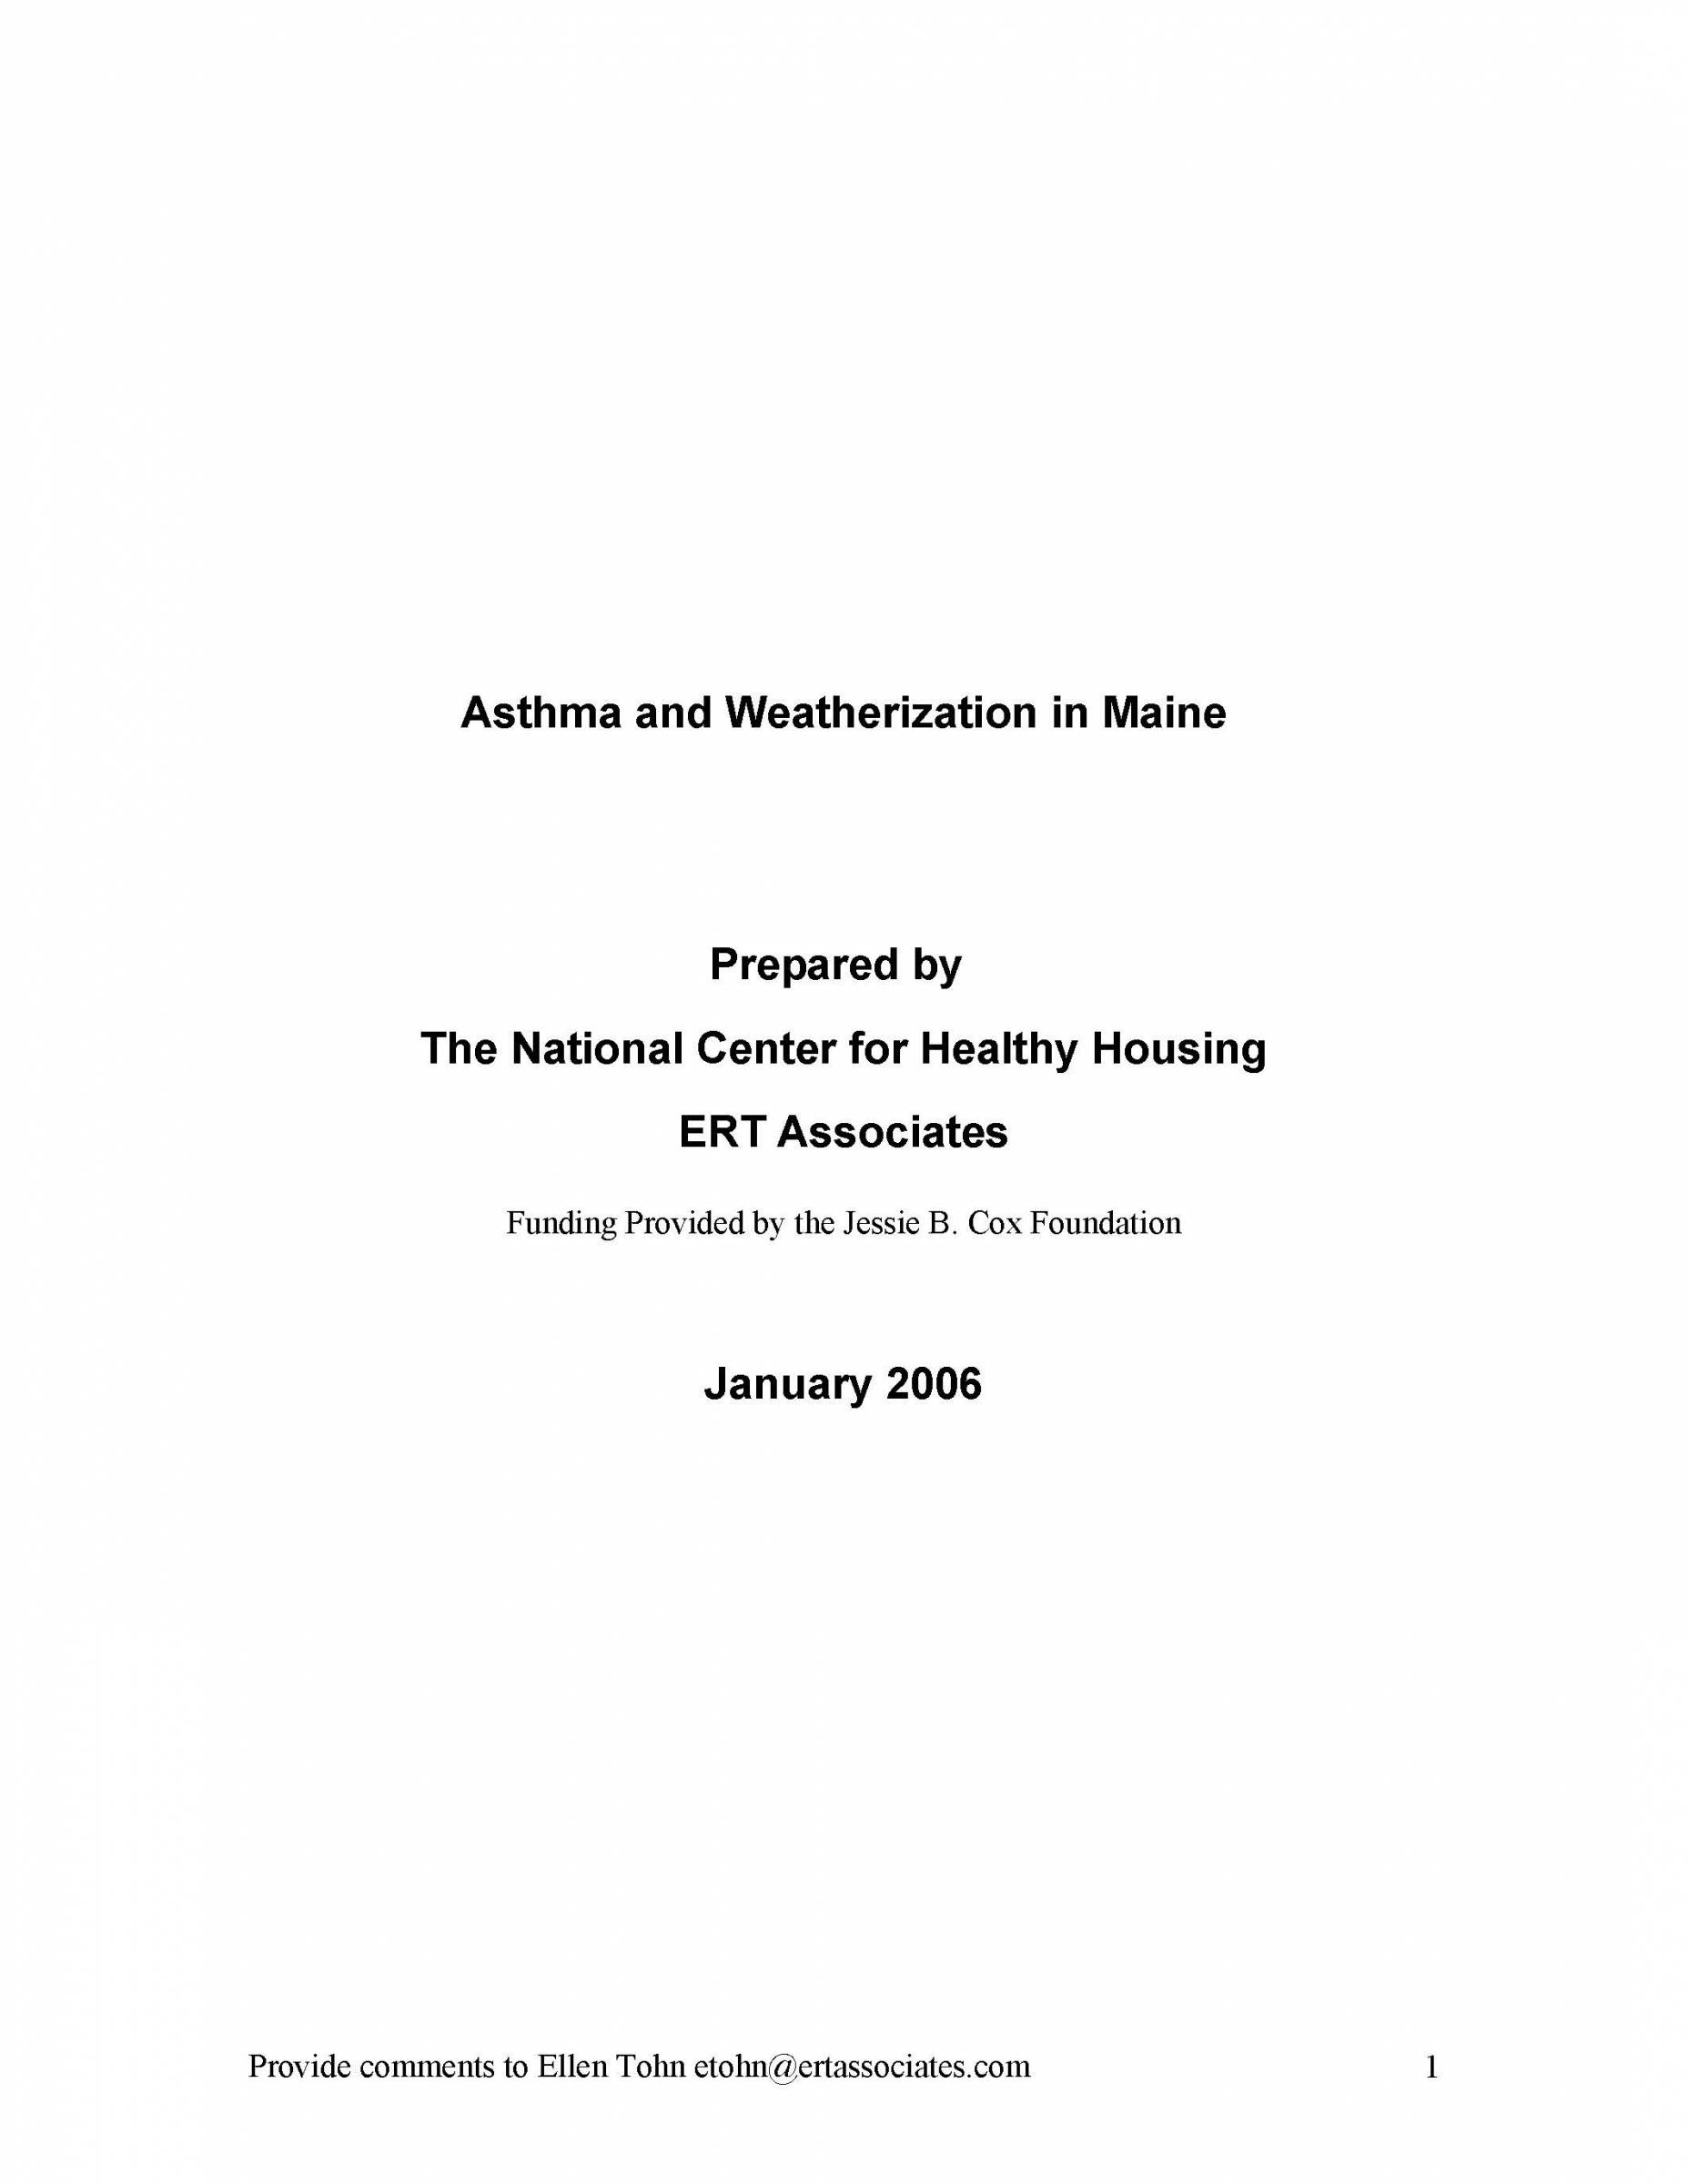 Asthma and Weatherization in Maine